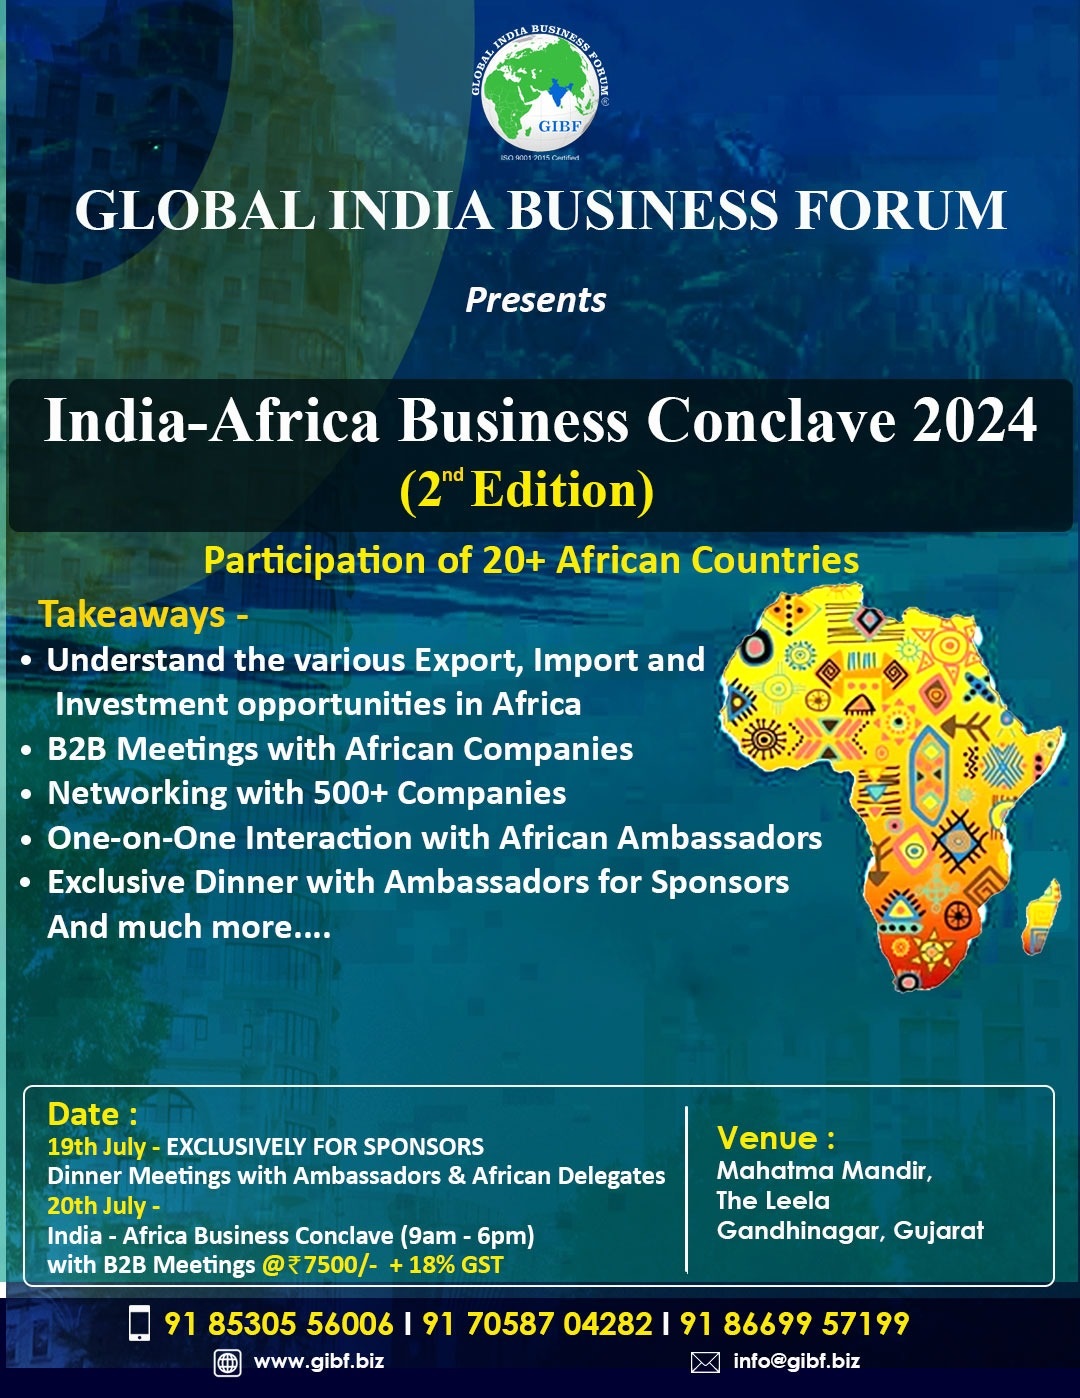 GIBF Upcoming Event - India Africa Business Conclave - 2024 Post